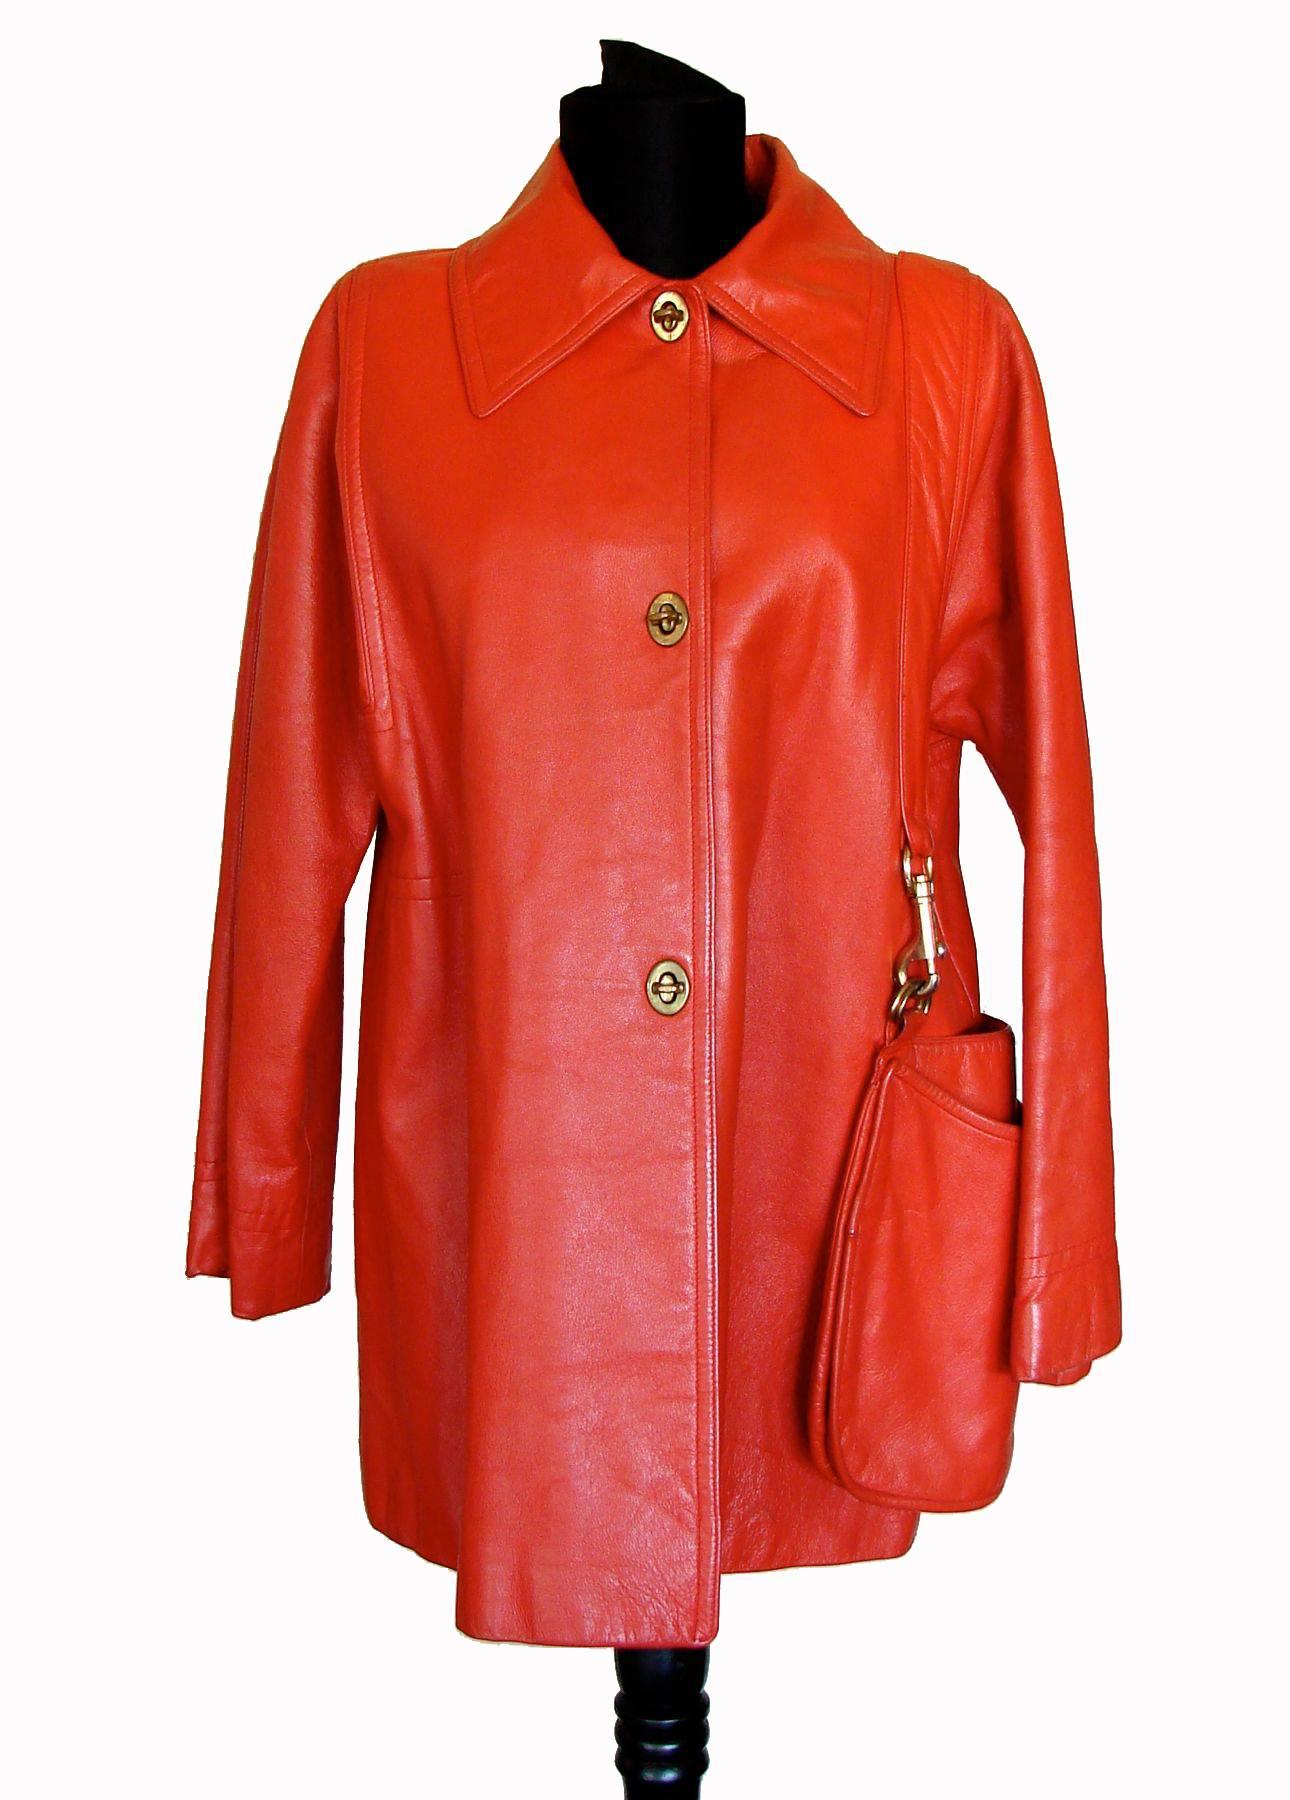 This incredibly chic and practical jacket was designed by Bonnie Cashin during her time at Sills in the 1960s.  Made from a tomato red or dark orange leather, it features brass turnlock fasteners down the front, and an attached matching hobo bag,